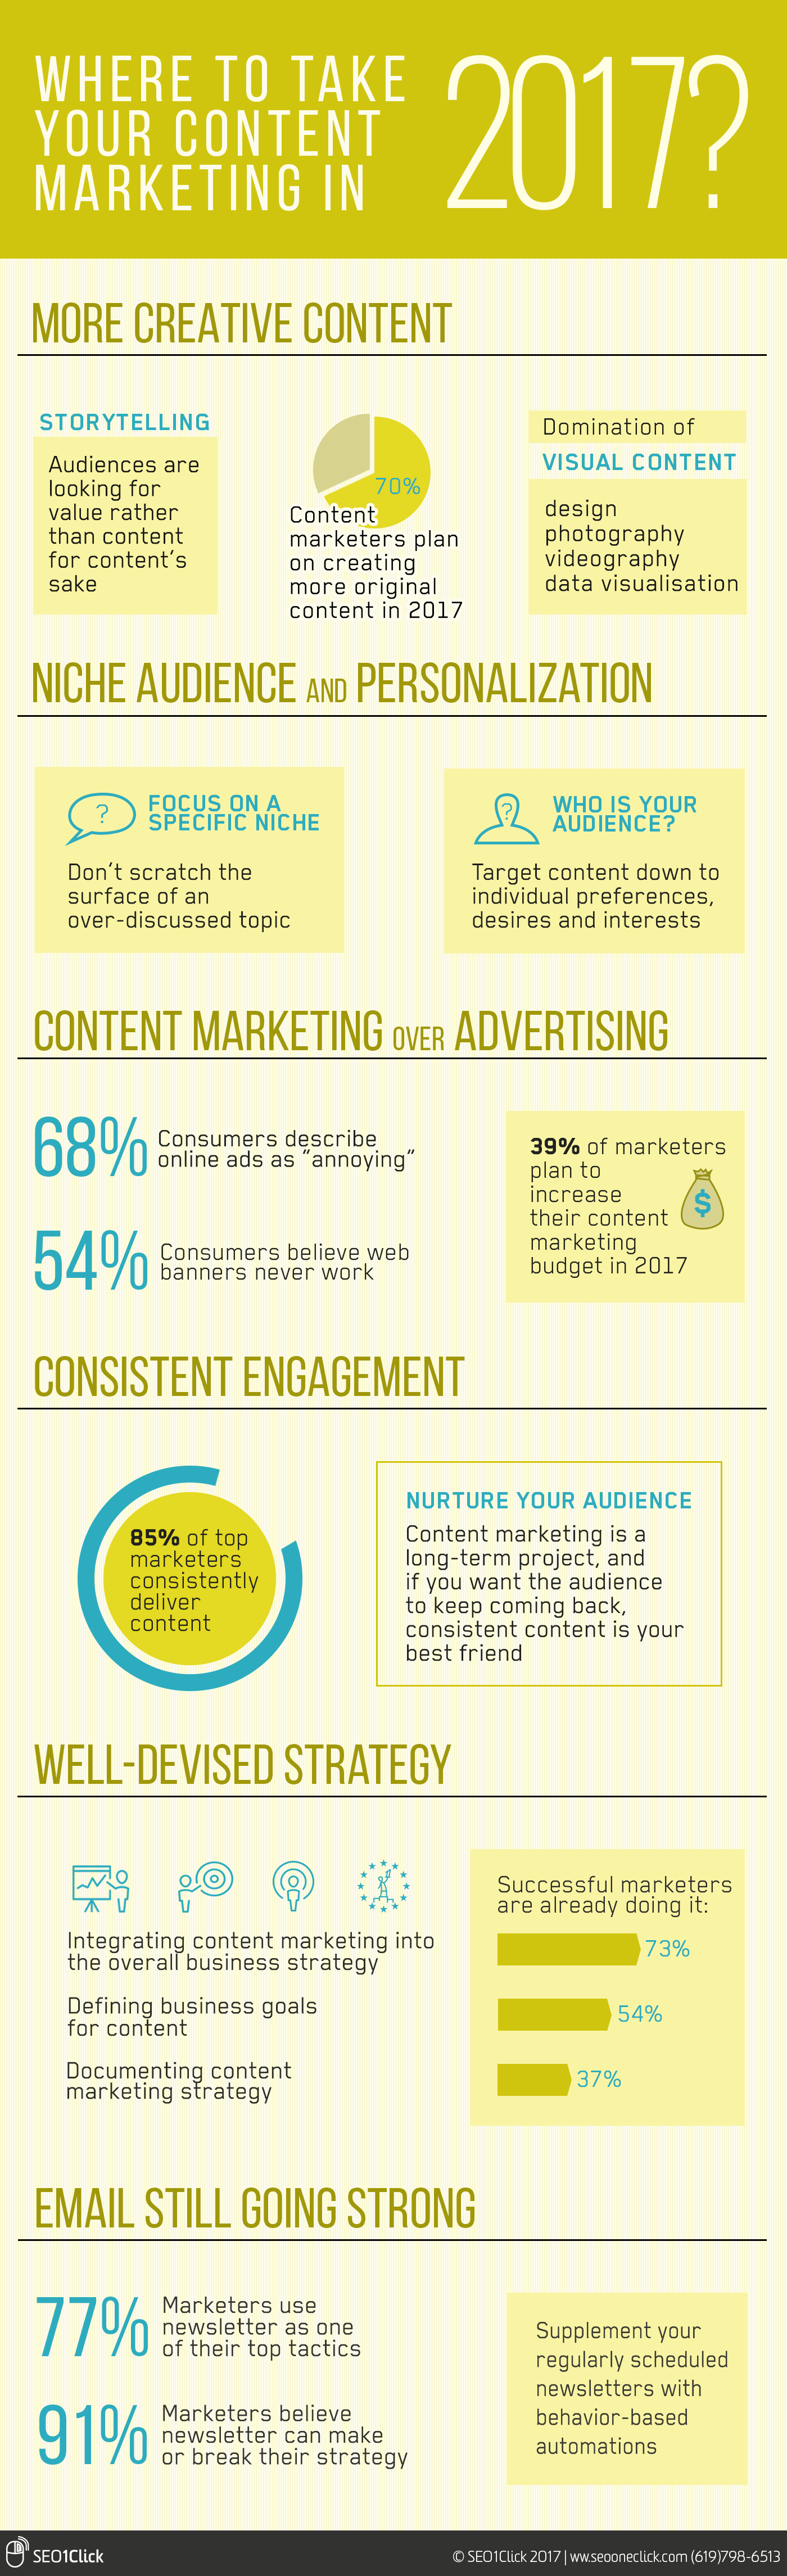 Content Marketing 2017 Infographic